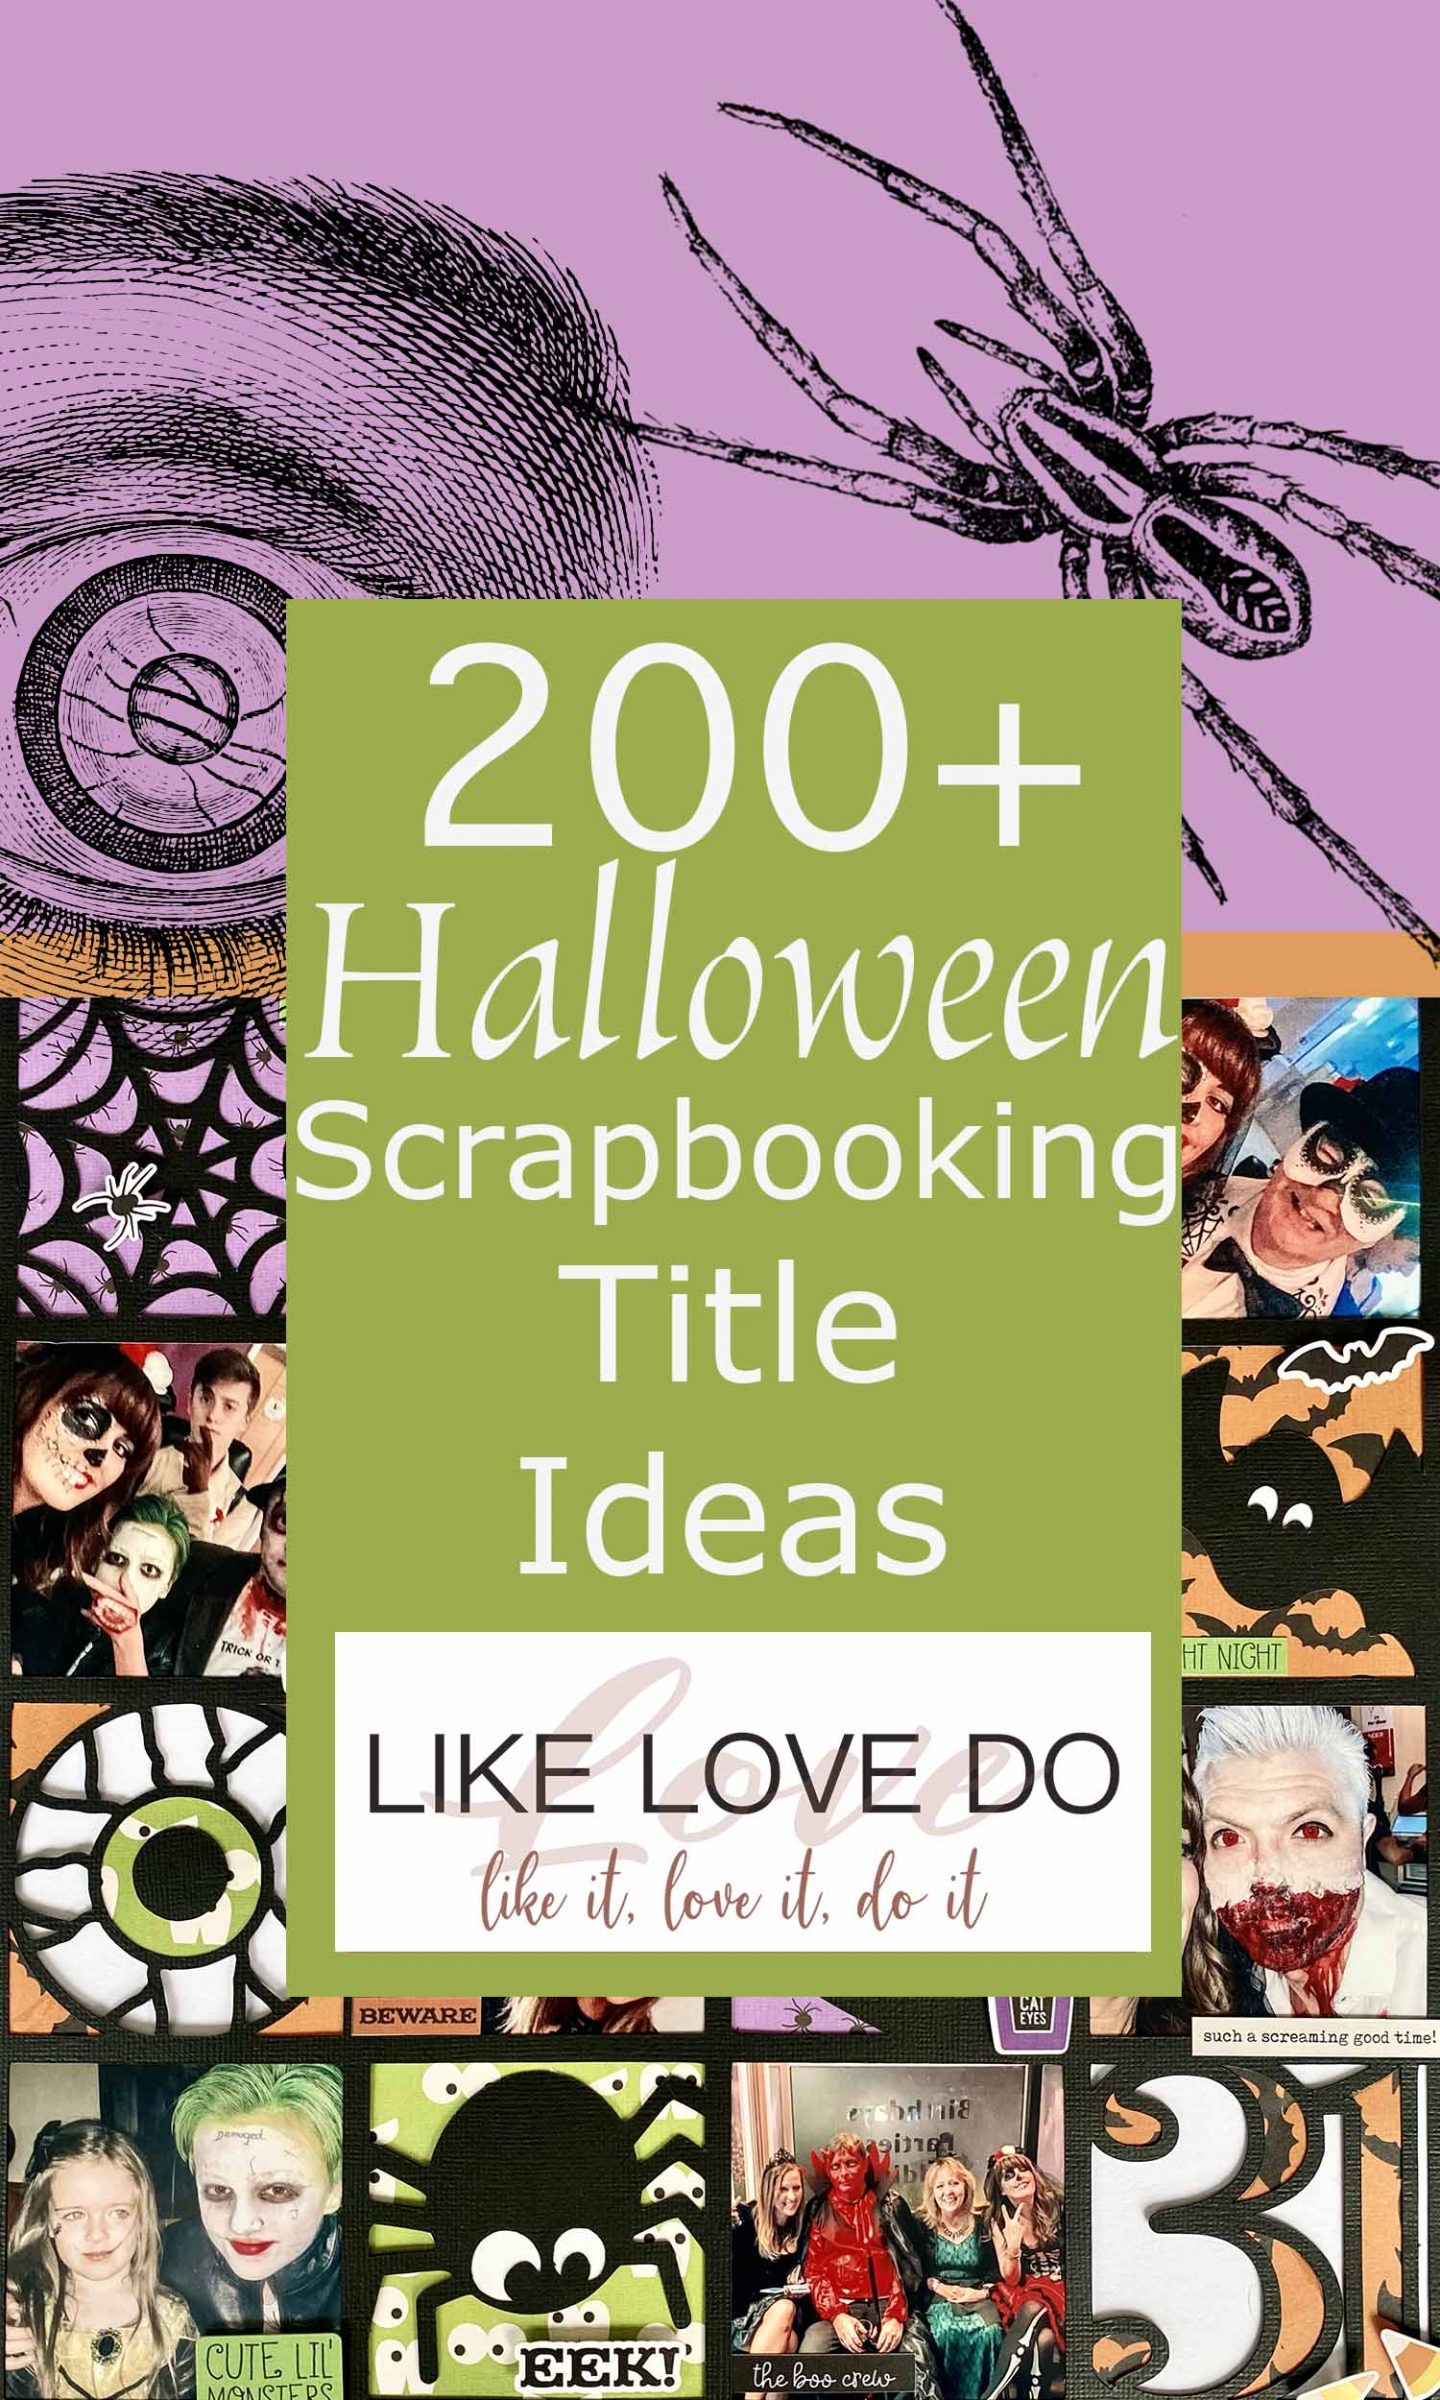 200 plus perfect Halloween Titles for scrapbooking and crafts. Fun and scary spooky halloween scrapbook title ideas for scrapbooks.